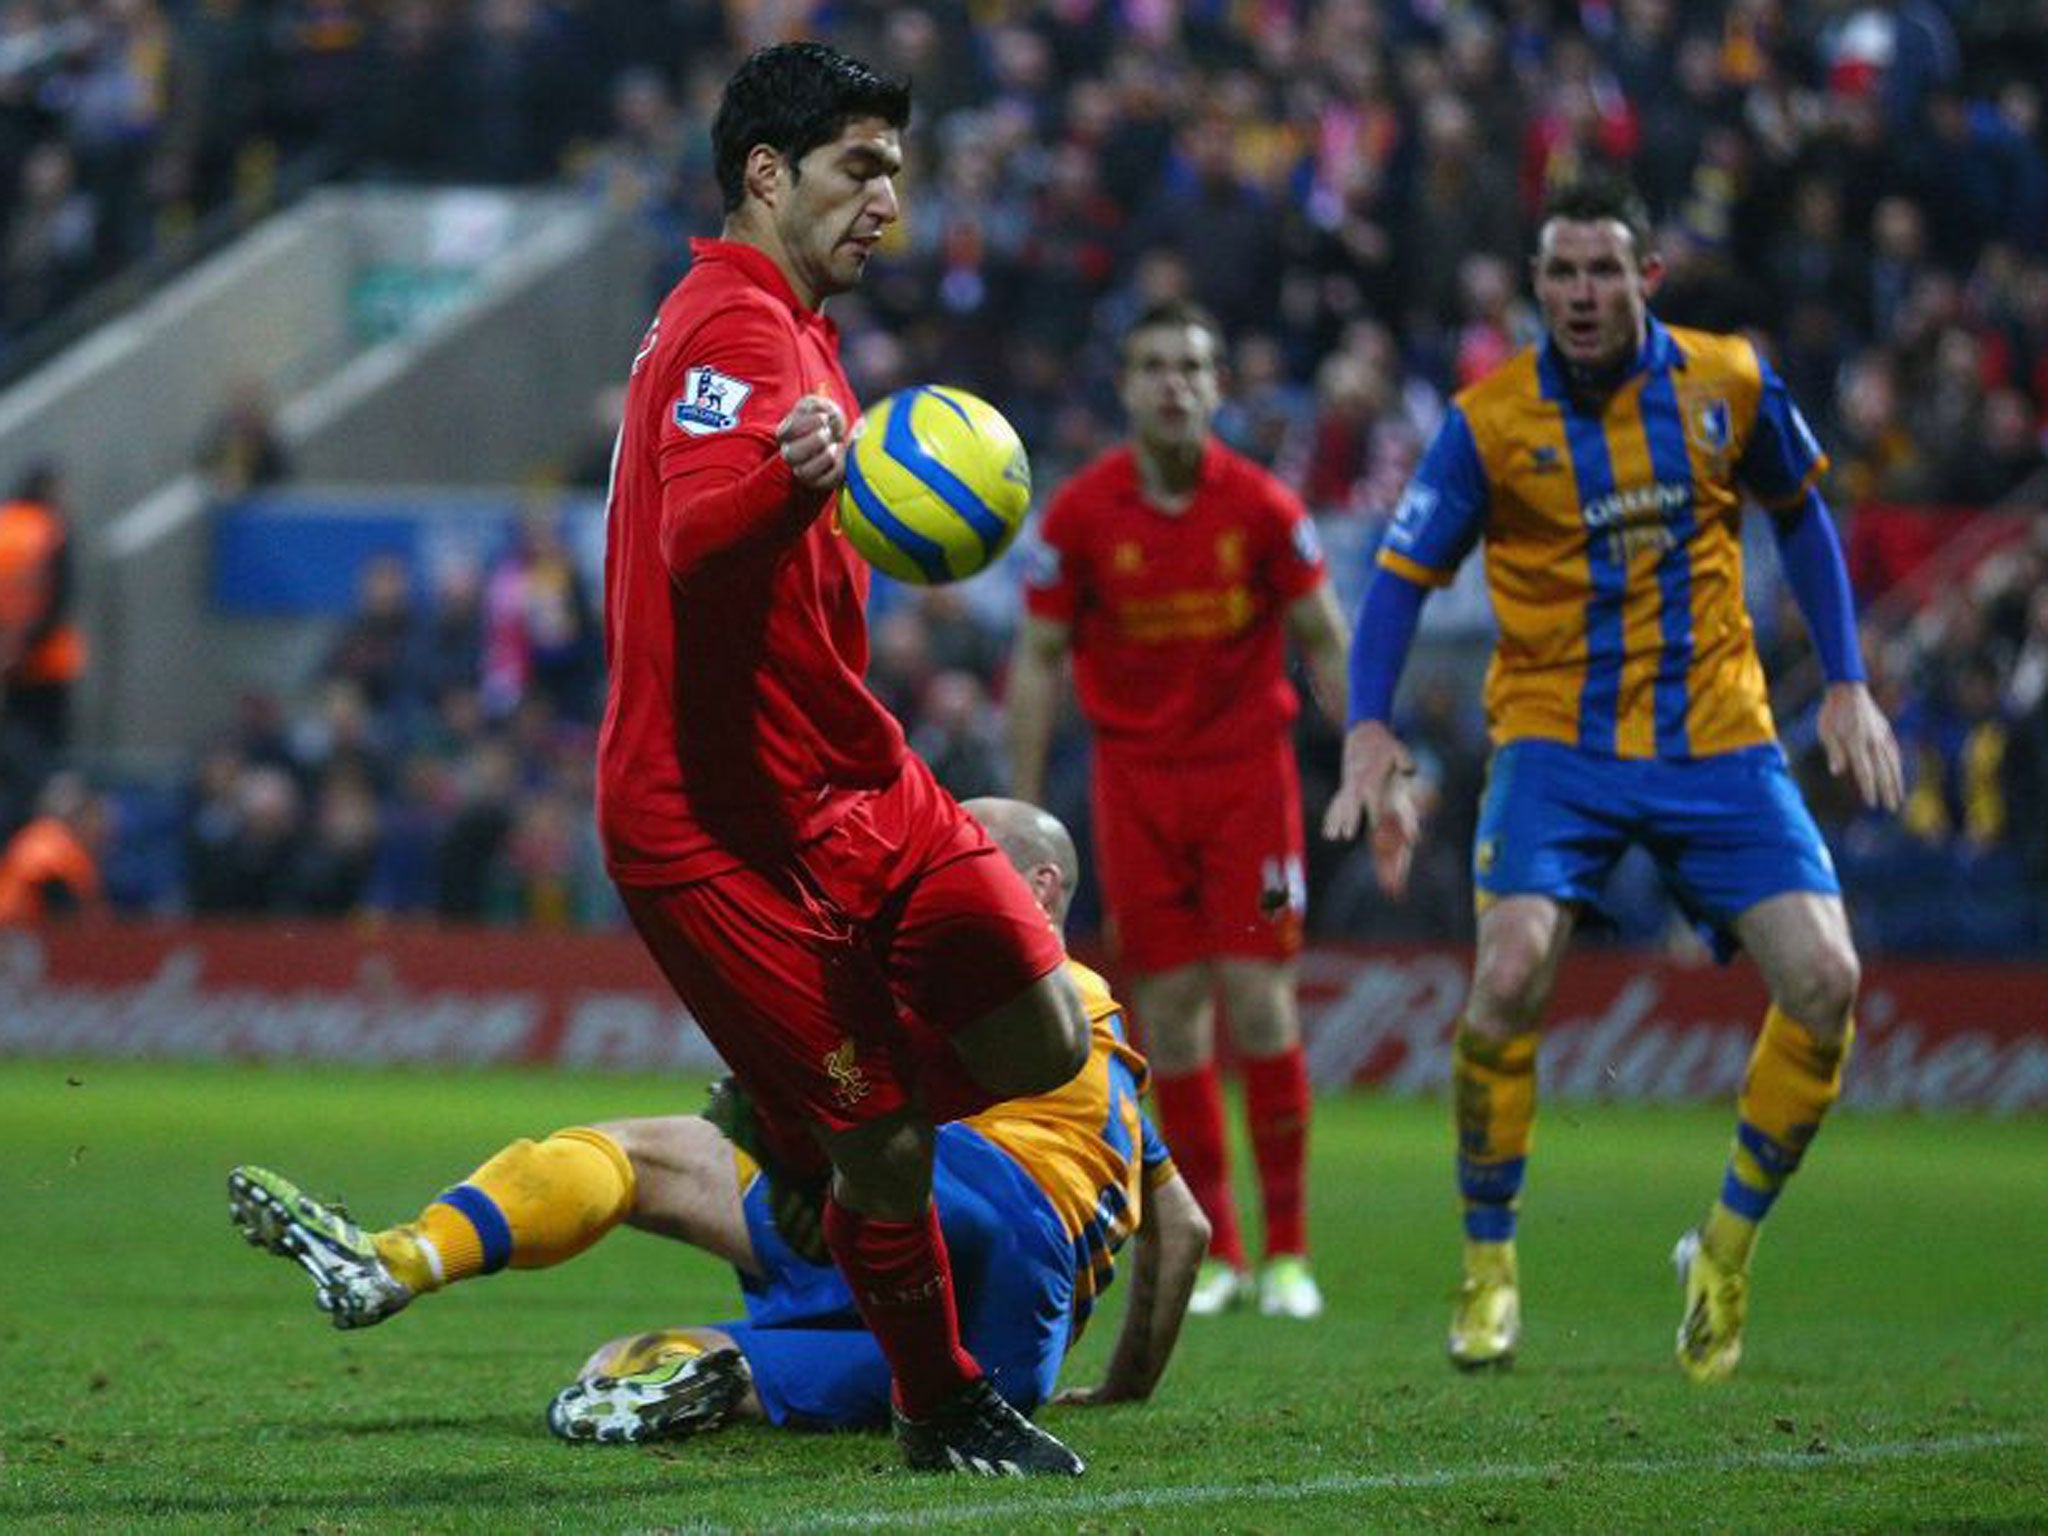 Luis Suarez clearly handles the ball before scoring Liverpool’s second goal against Mansfield in the FA Cup yesterday